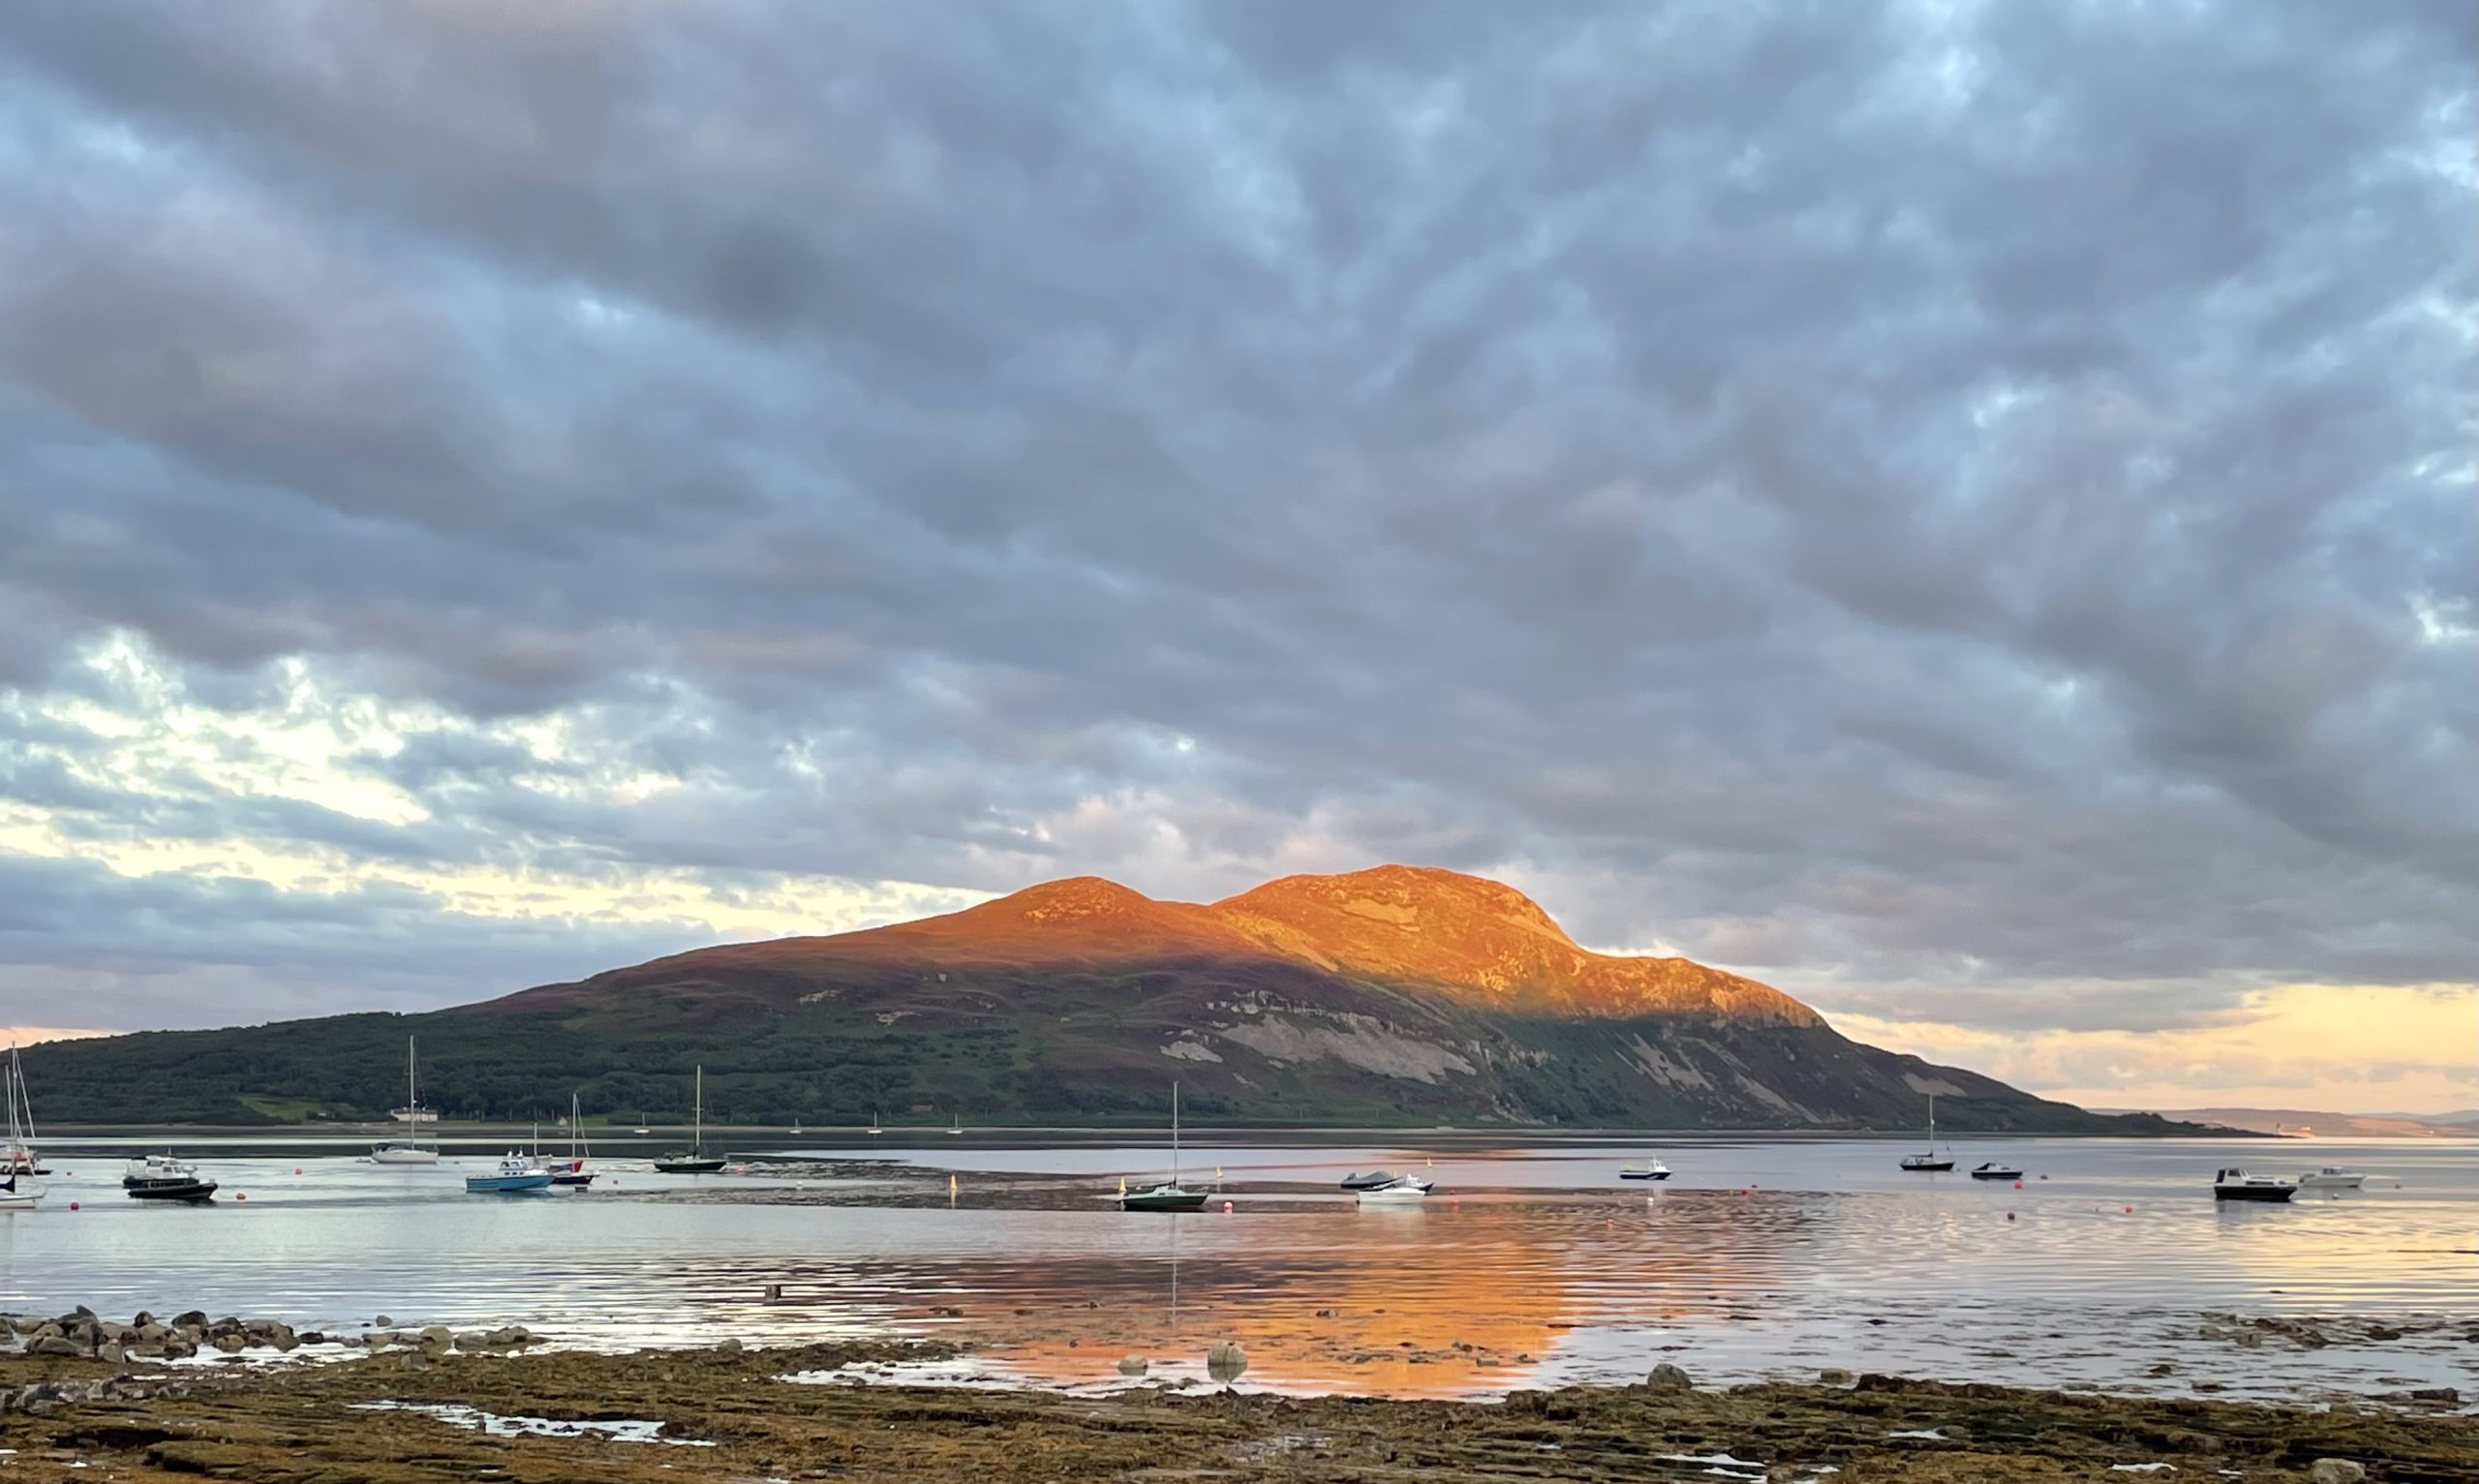 Looking over to Holy Isle at sunset from Lamlash, Isle of Arran 